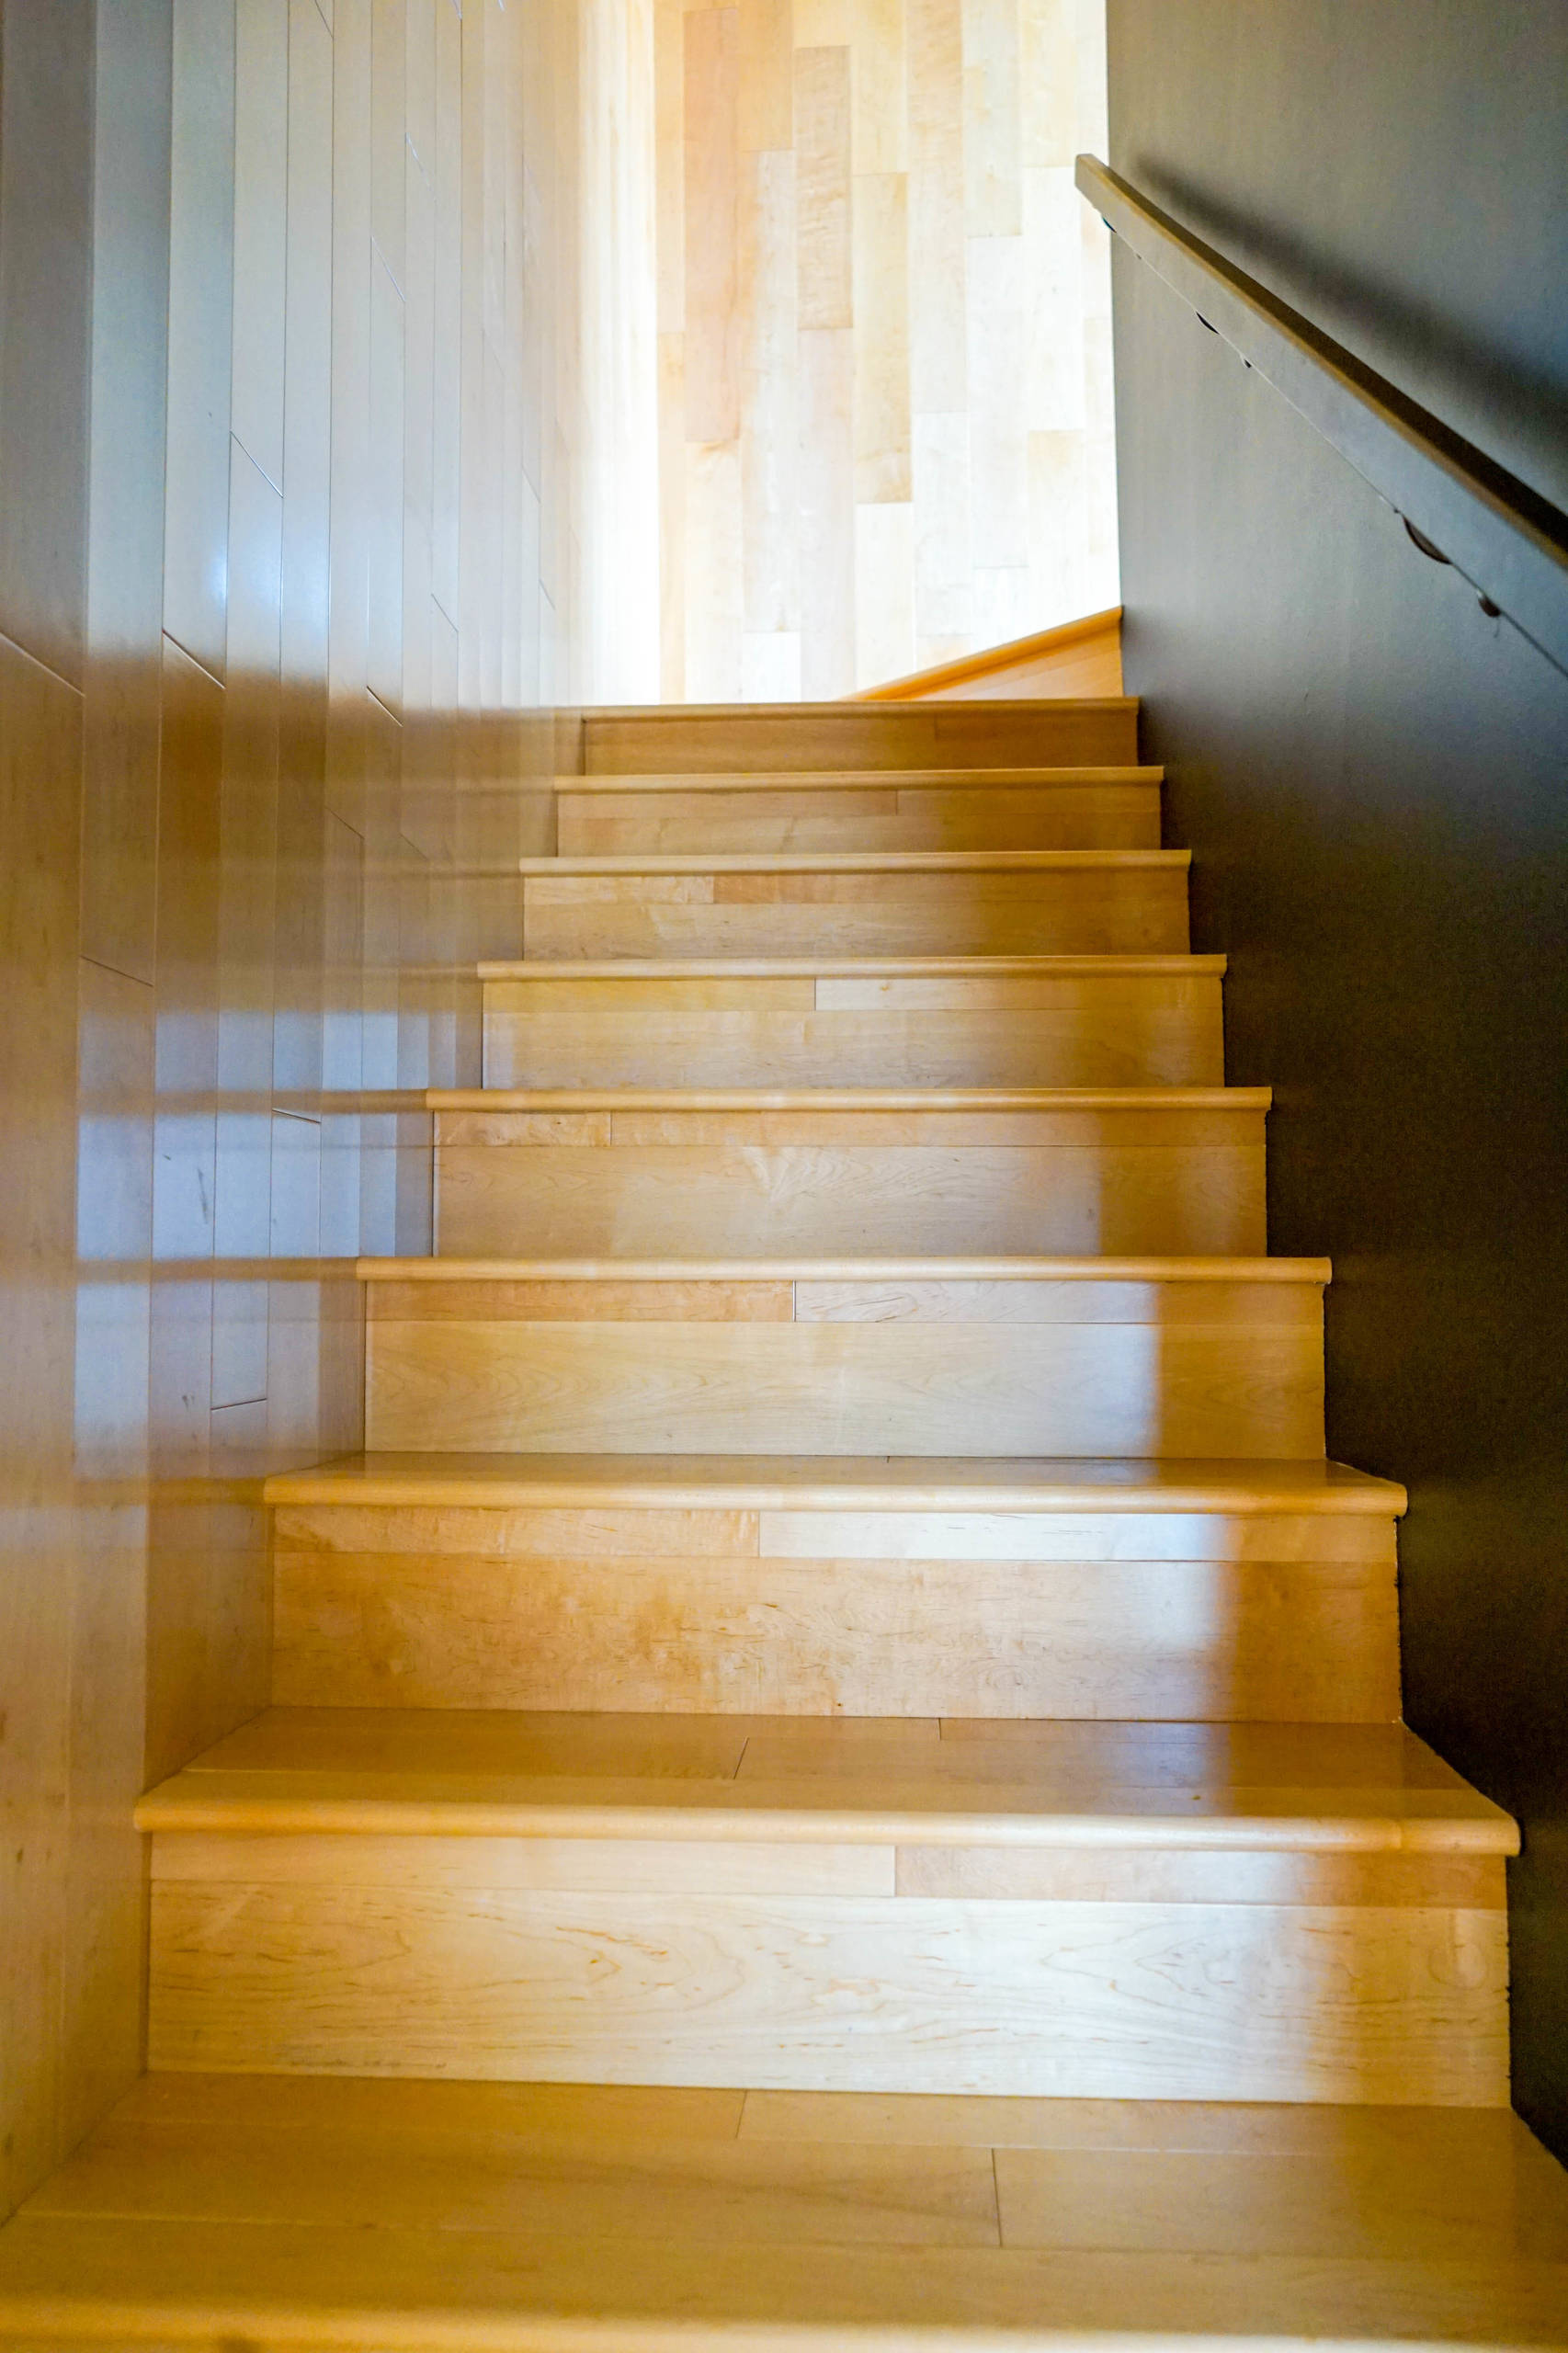 This ADU has it all, with this stunning light wood staircase, the lighter wood which is used upon the reflective light side provides natural light for easy ascension of the stairs.